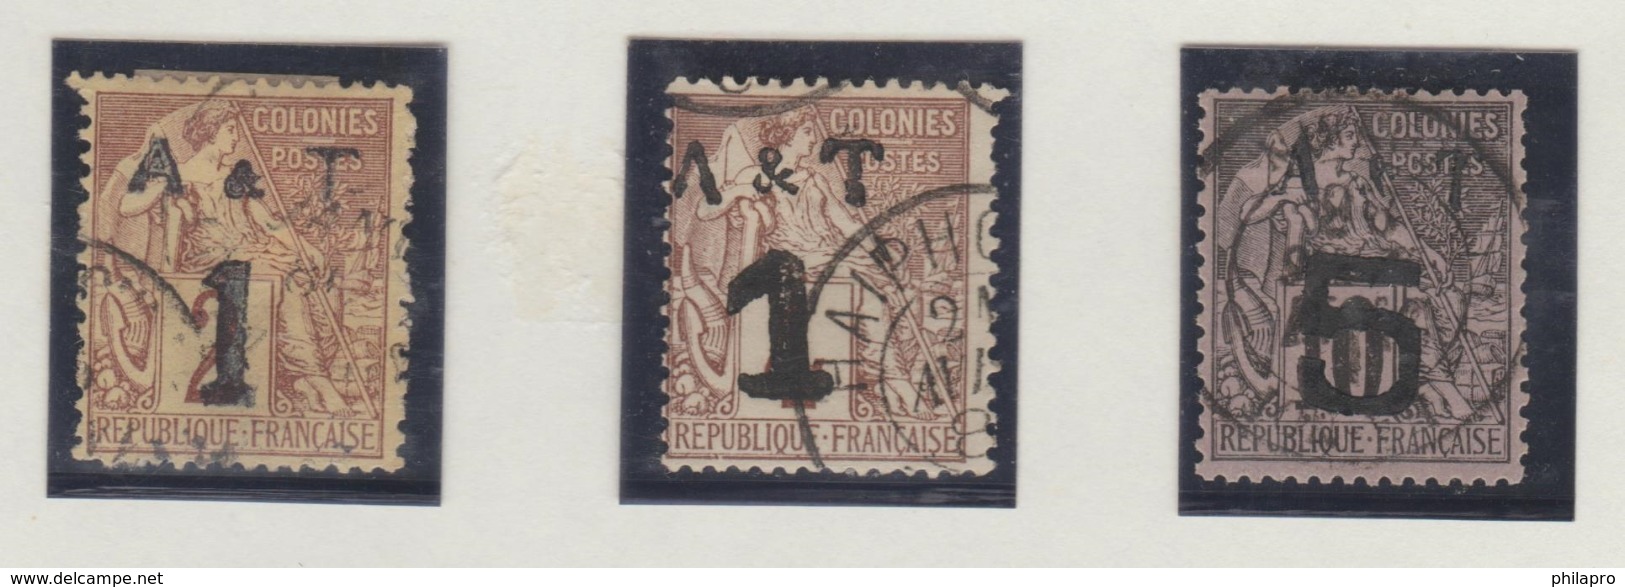 ANNAM ET TONKIN  YVERT N° 1+2+4  Used  Réf  7 C - Used Stamps